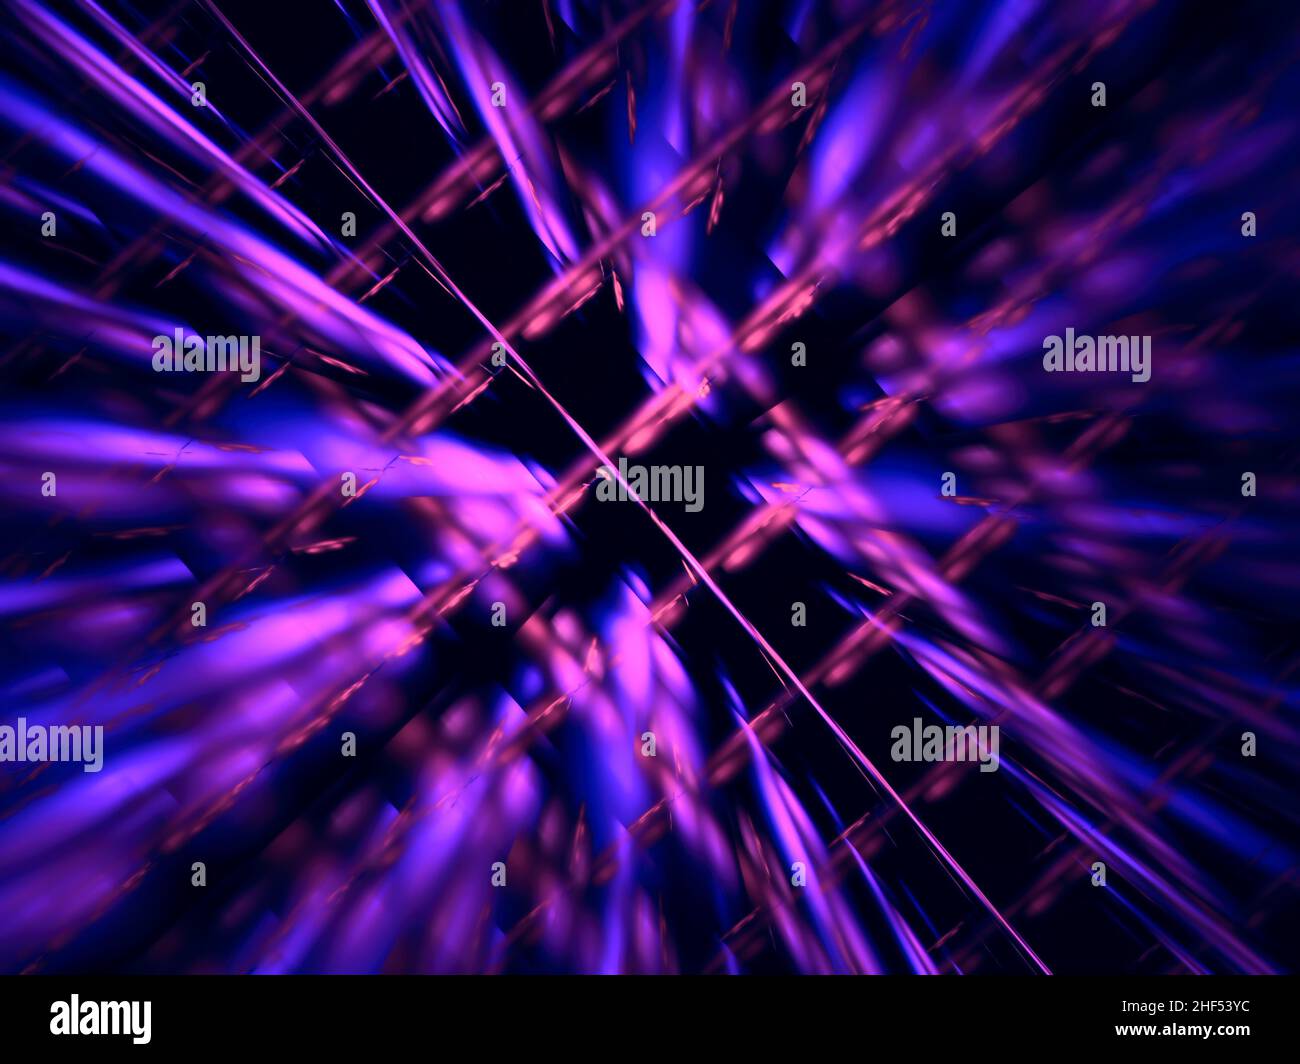 Neon glowing stripes with motion blur effect - abstract 3d illustration Stock Photo